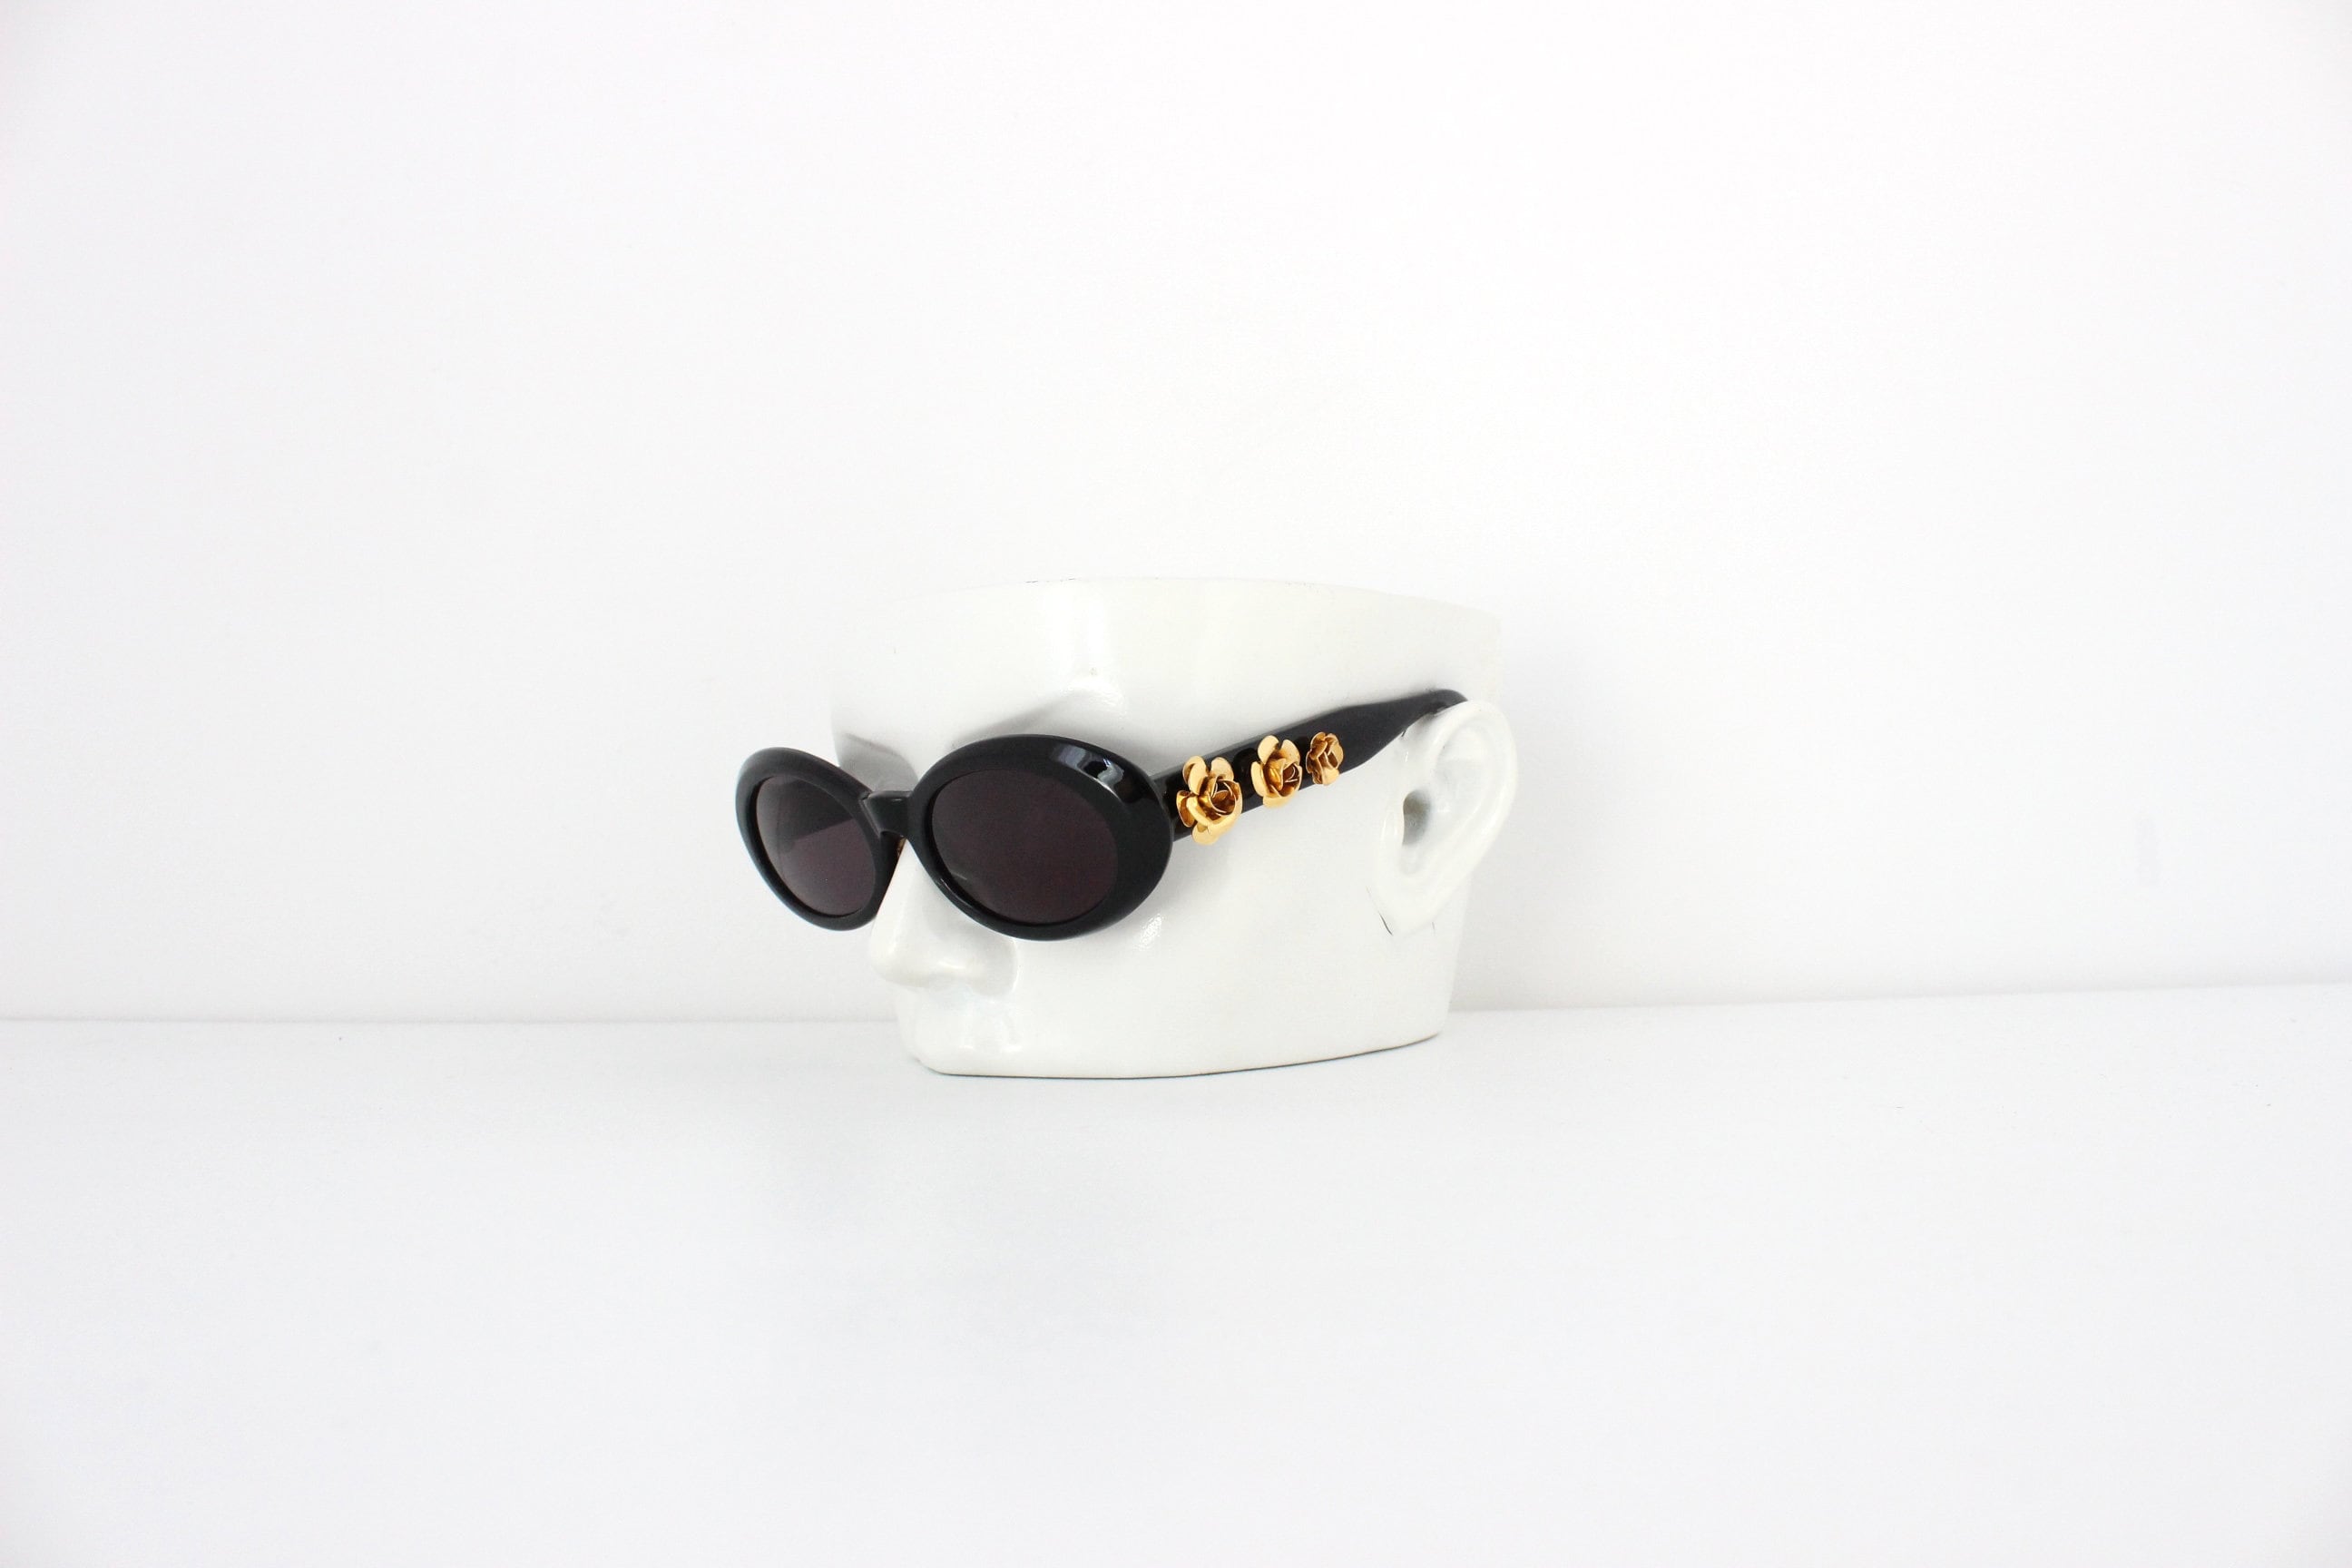 Collectible 80s GIANNI VERSACE Oval EyeSunglasses w/ Gold Roses